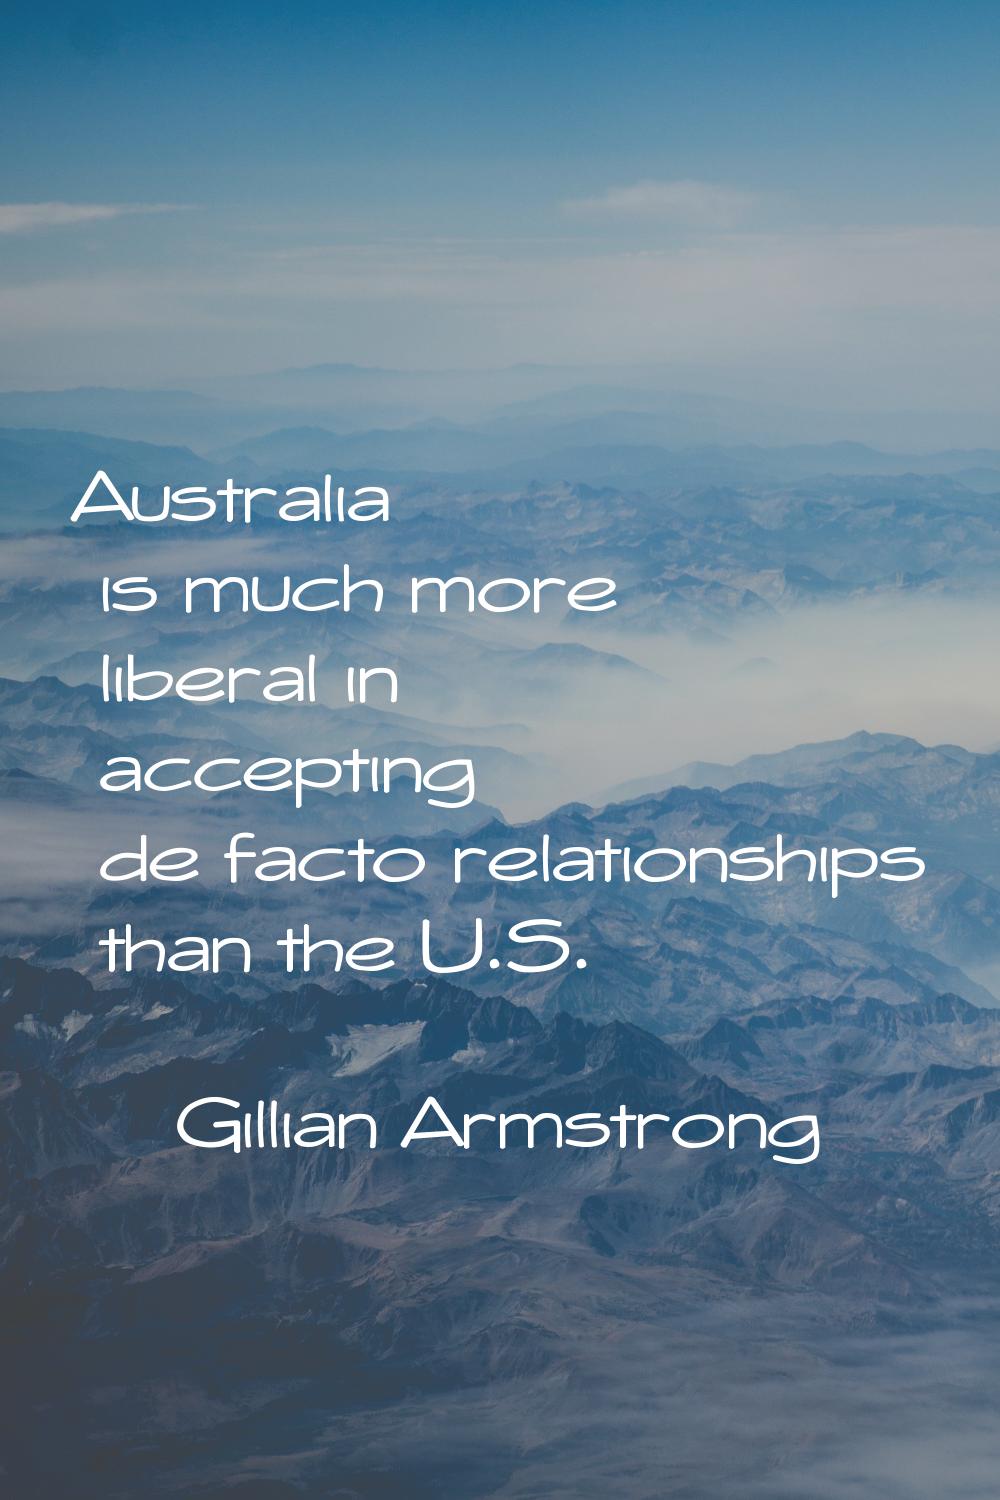 Australia is much more liberal in accepting de facto relationships than the U.S.